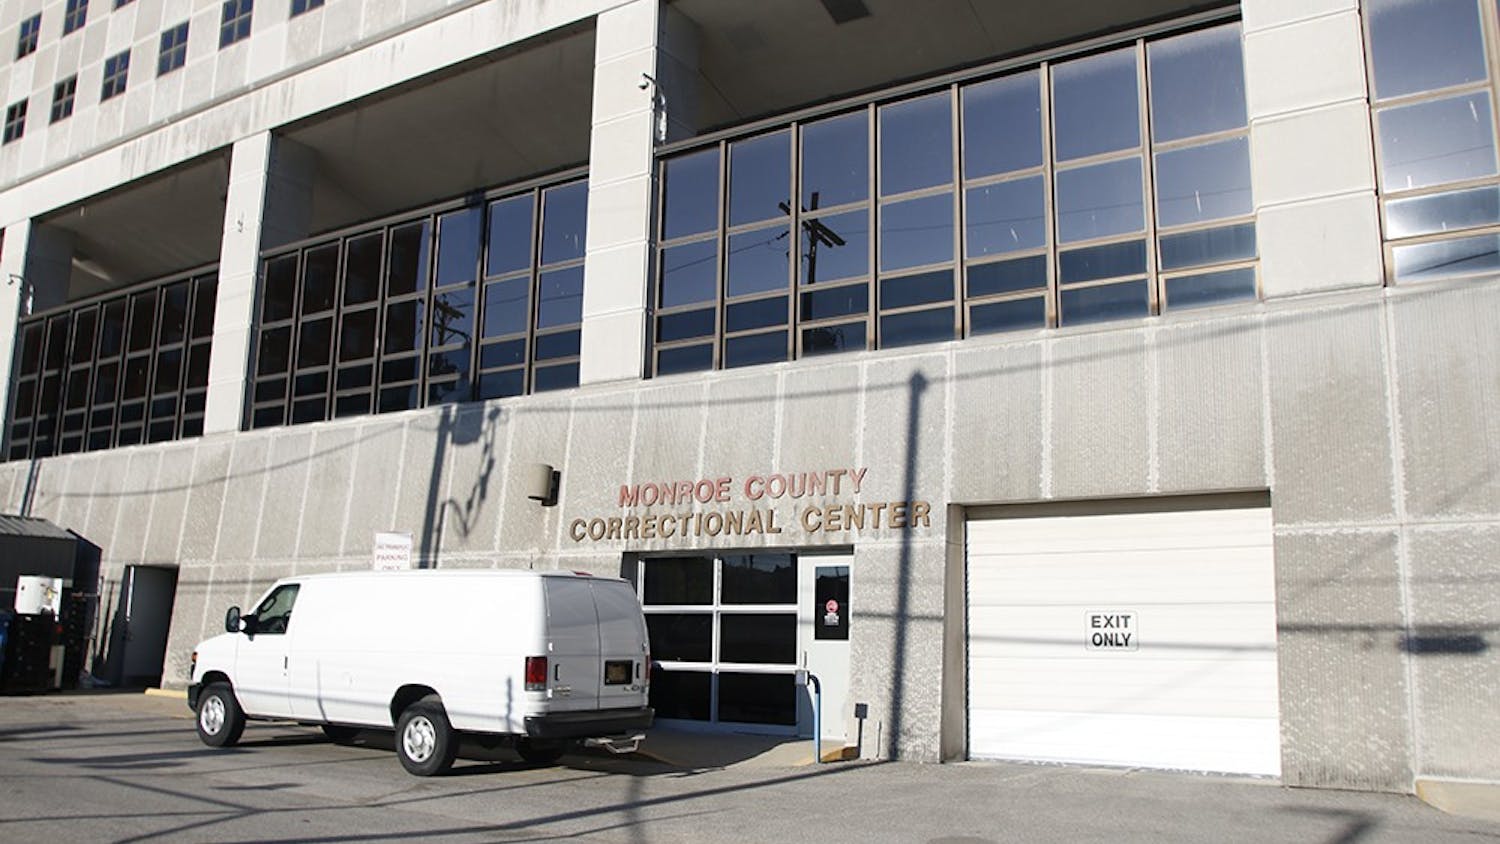 The exterior of the Monroe County Jail on Apr. 28, 2015.